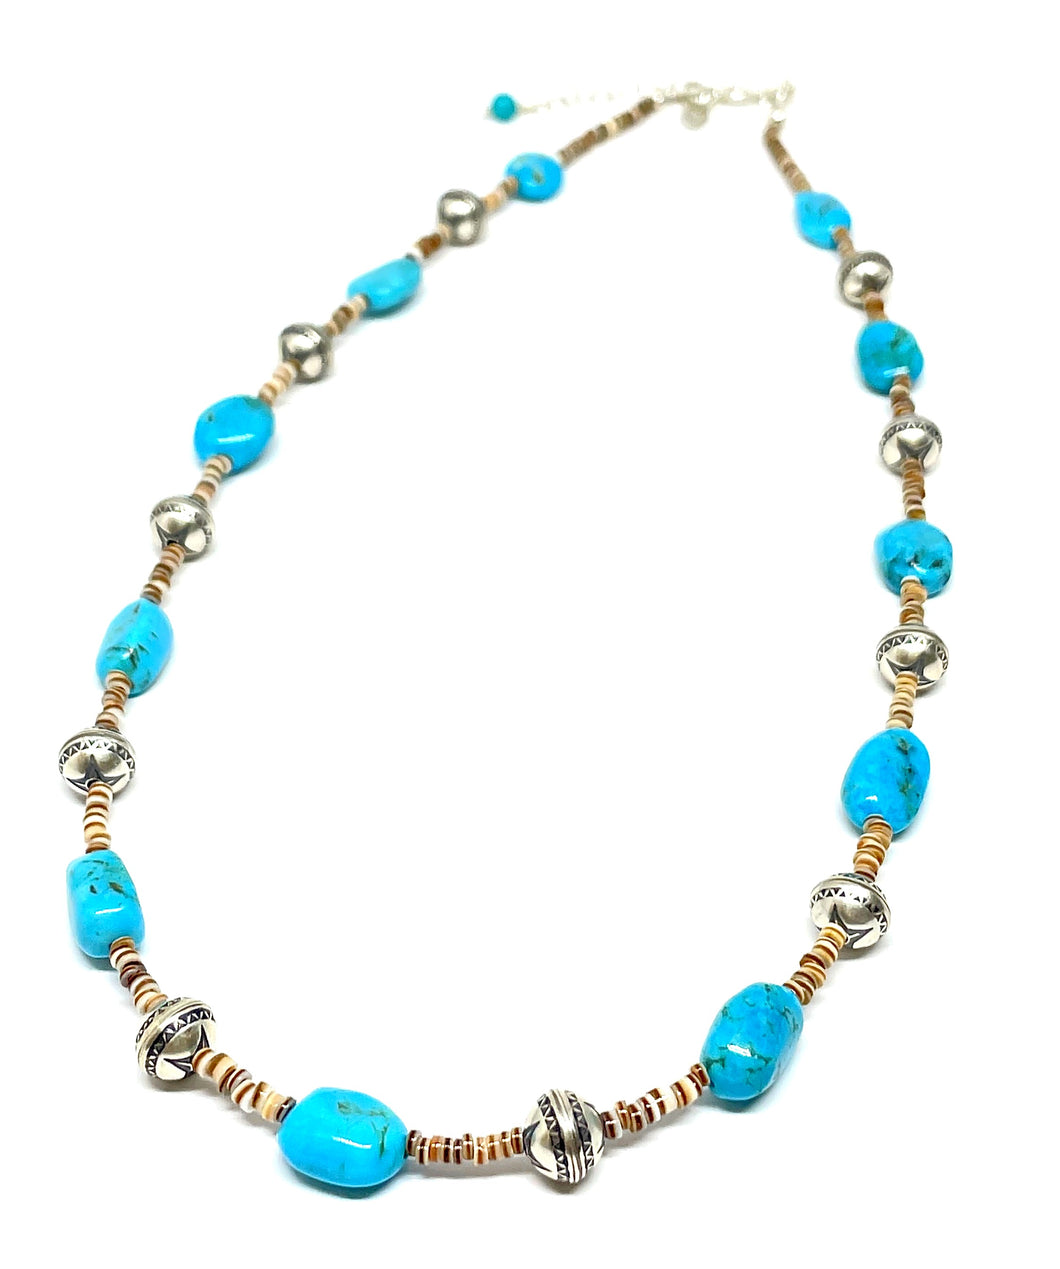 ByKila, Necklace with Kingman turquoise and sterling silver clasp (925)